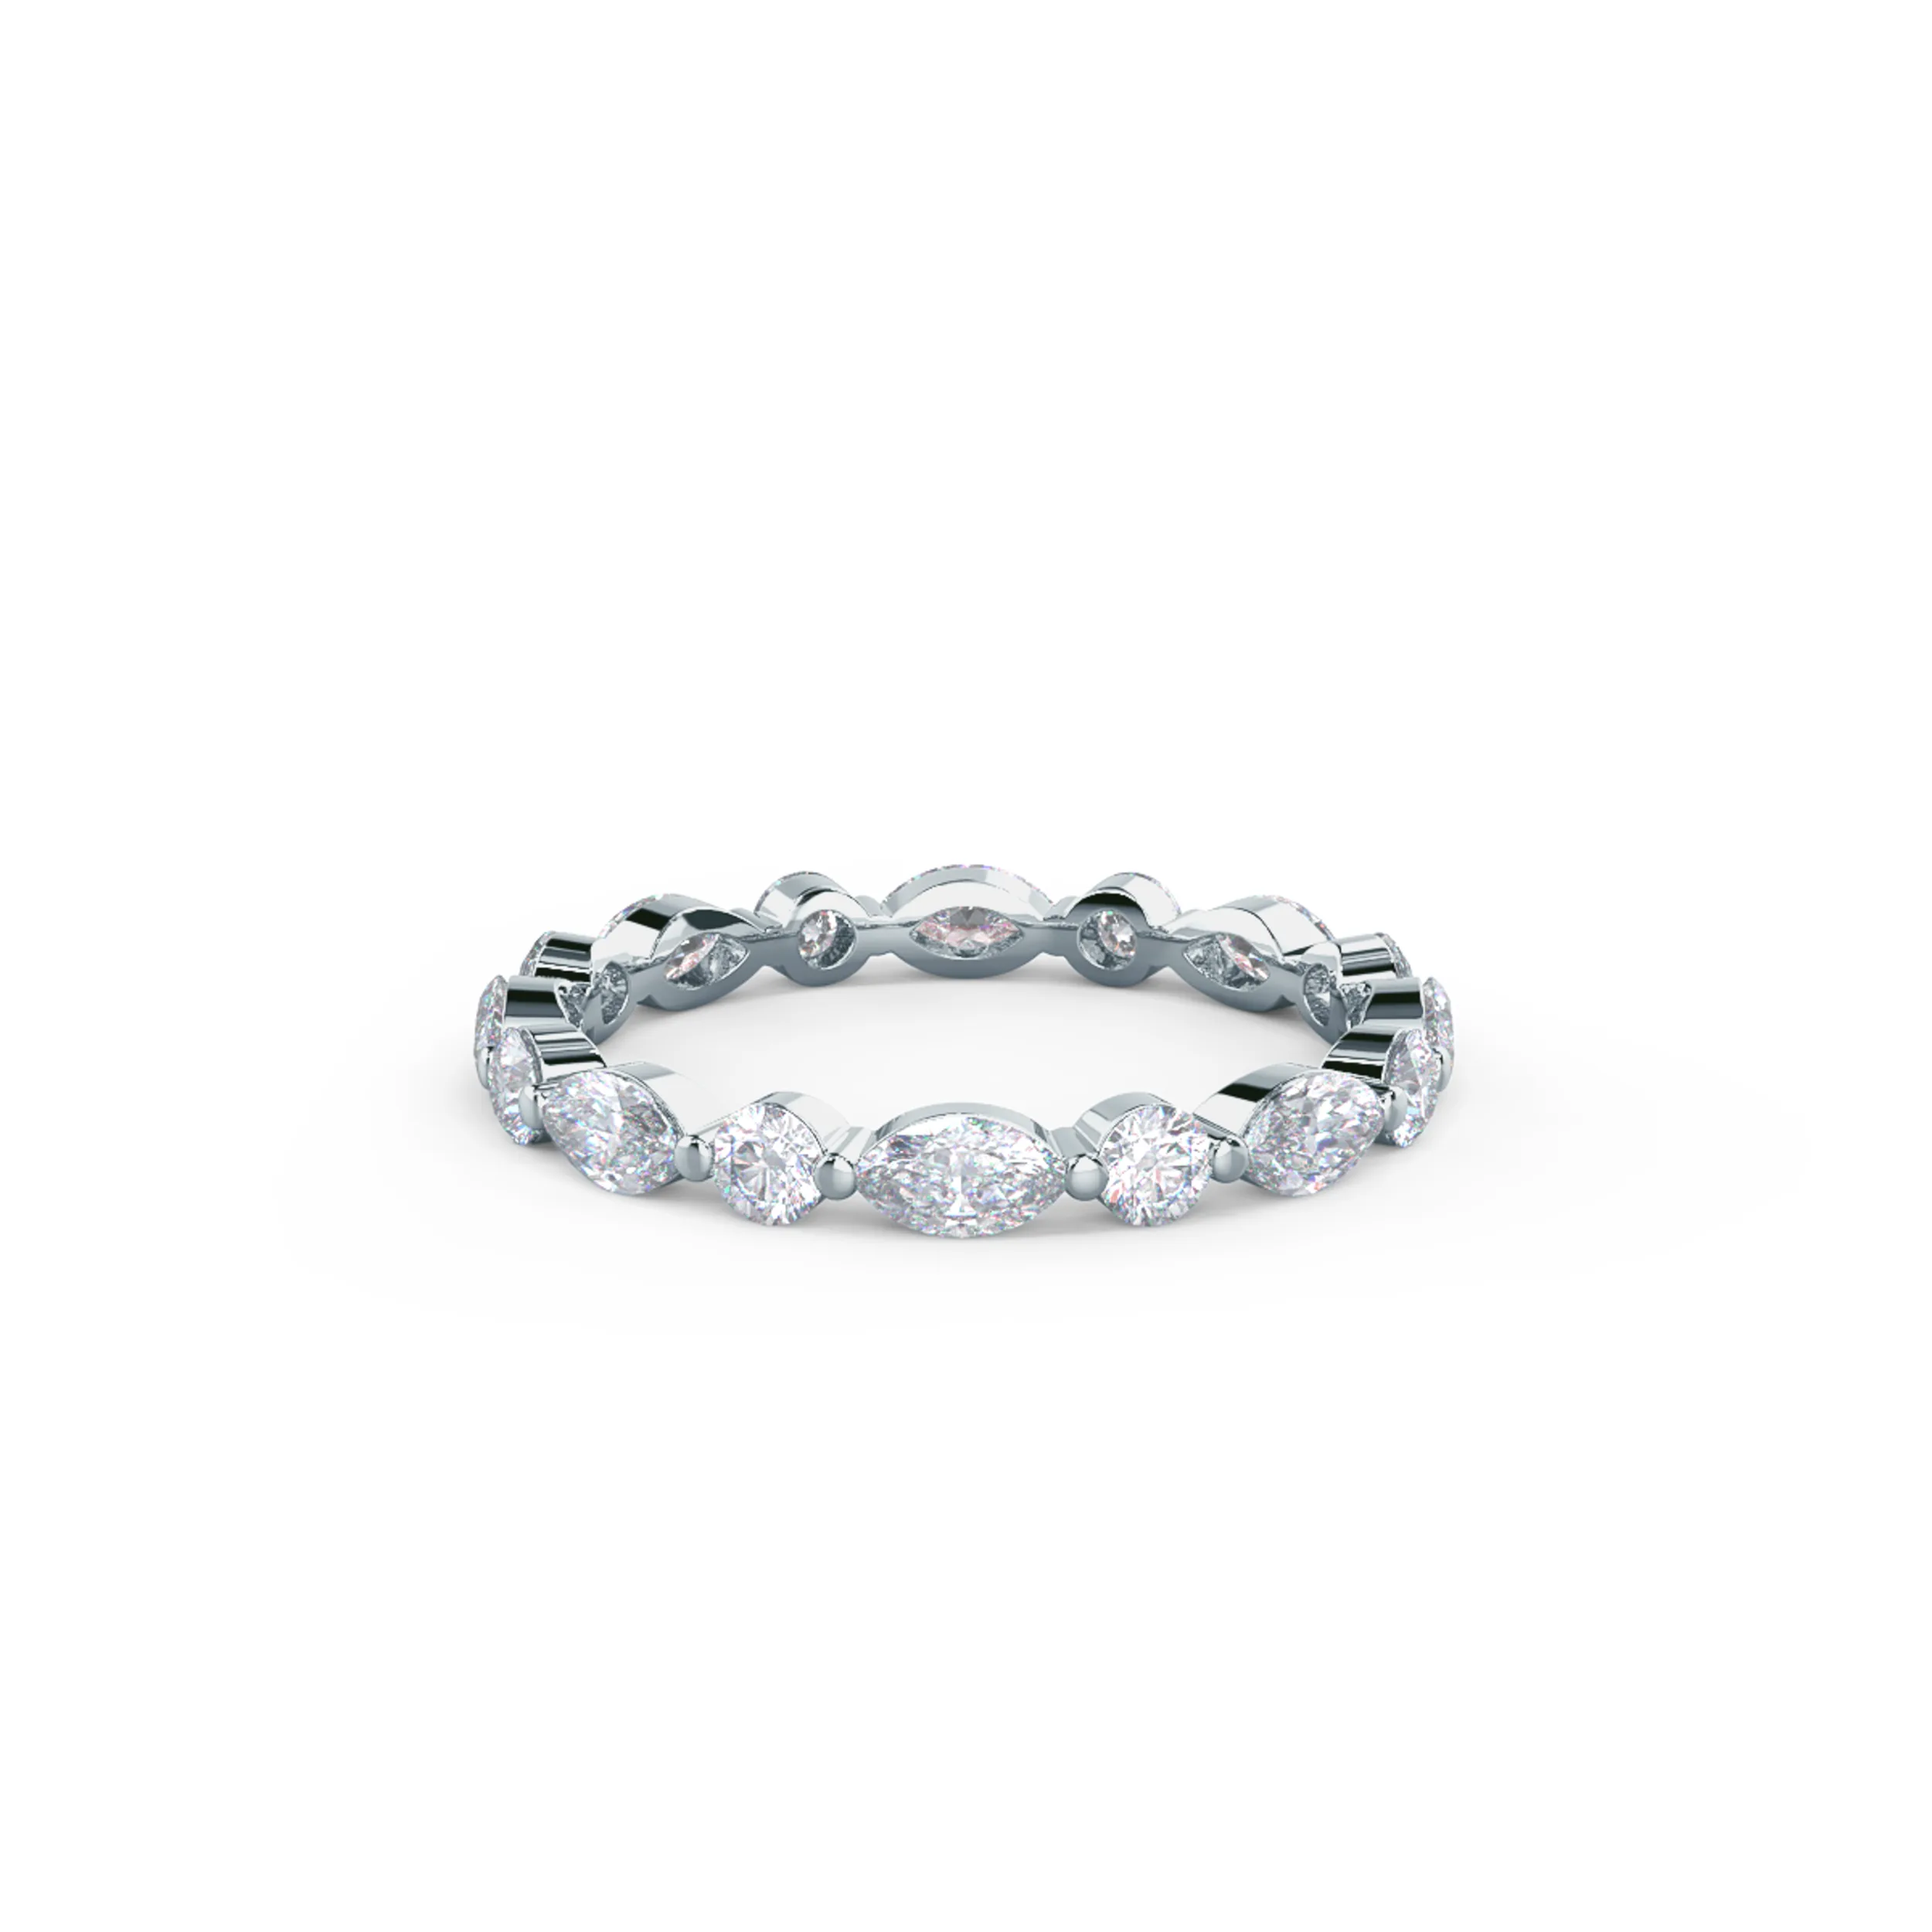 1.2 ct Lab Diamonds set in 18k White Gold Marquise and Round East-West Eternity Band (Main View)